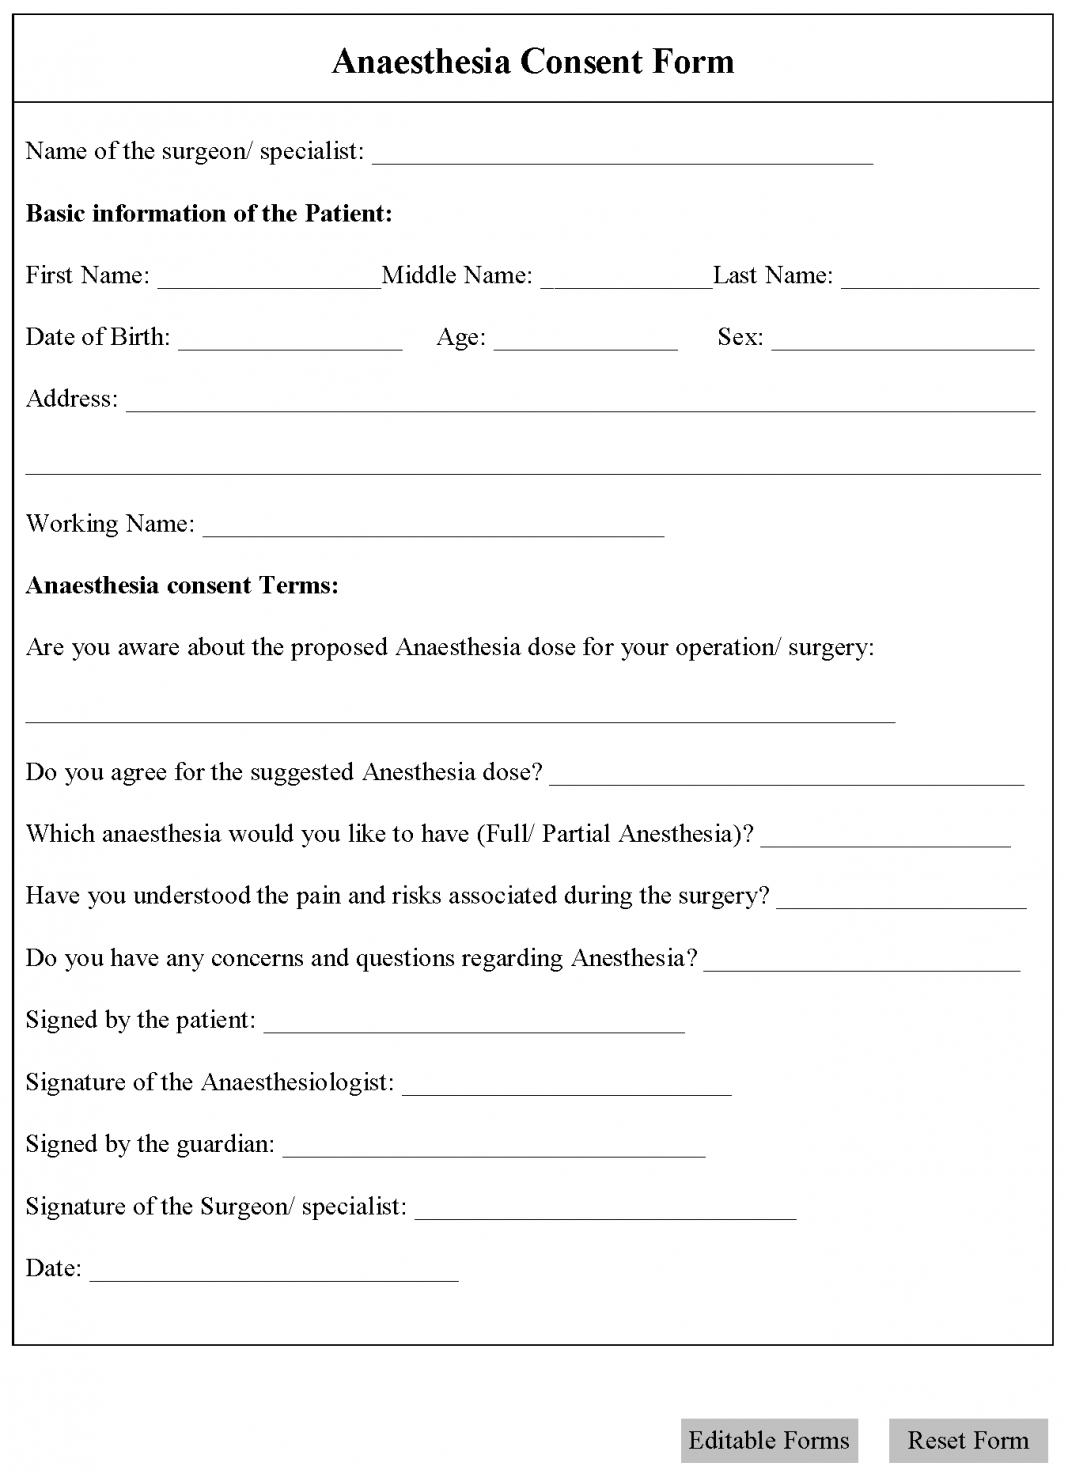 Anaesthesia Consent Form Editable Forms